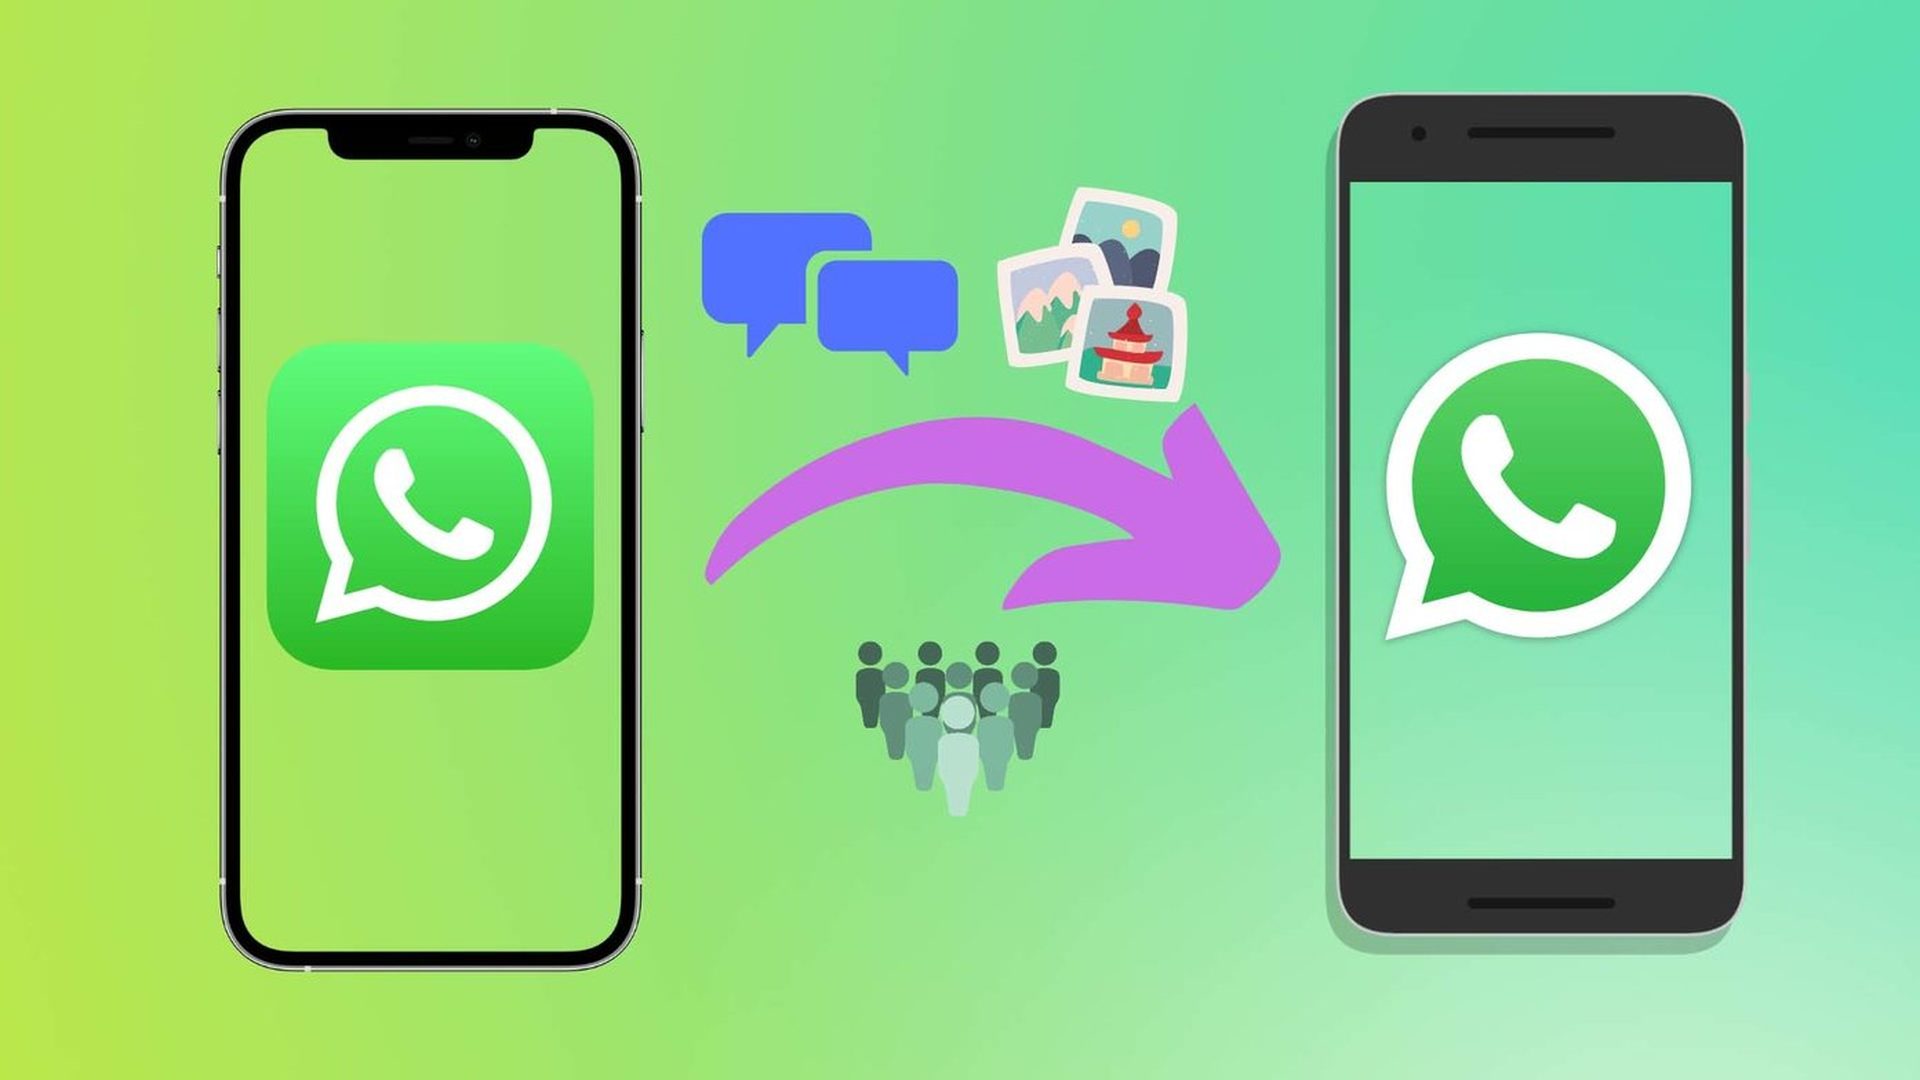 How to transfer Whatsapp messages from Android to iPhone?